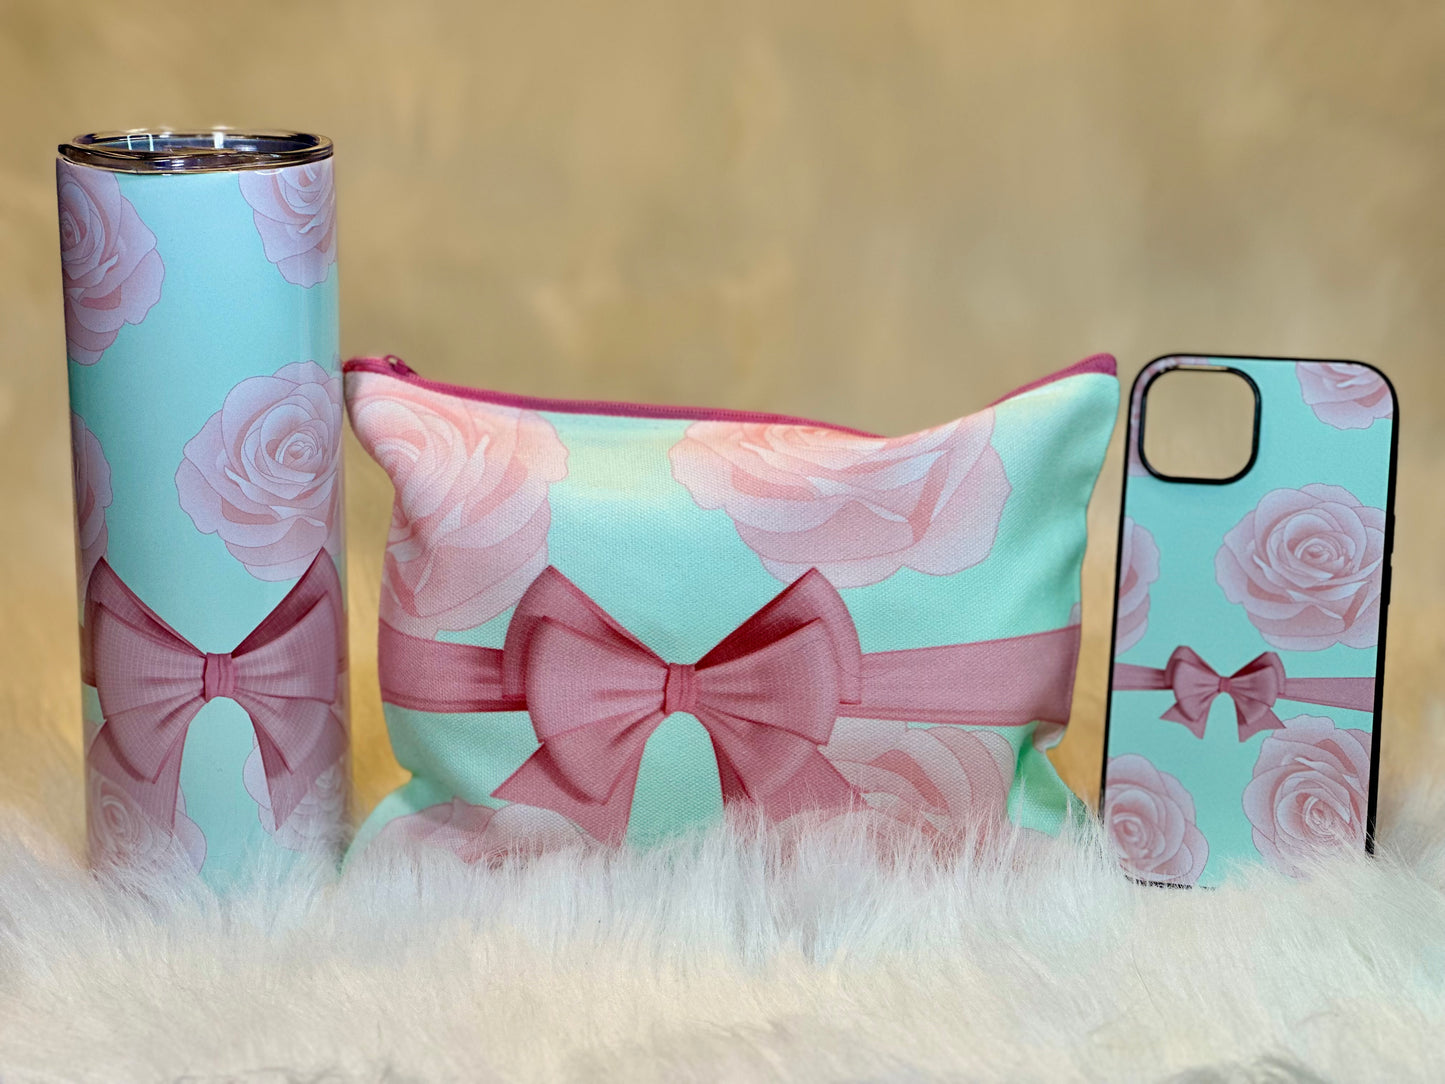 SOFT PINK ROSES - 20oz TUMBLER+COSMETIC/TOILETRY BAG+ iPHONE CASE